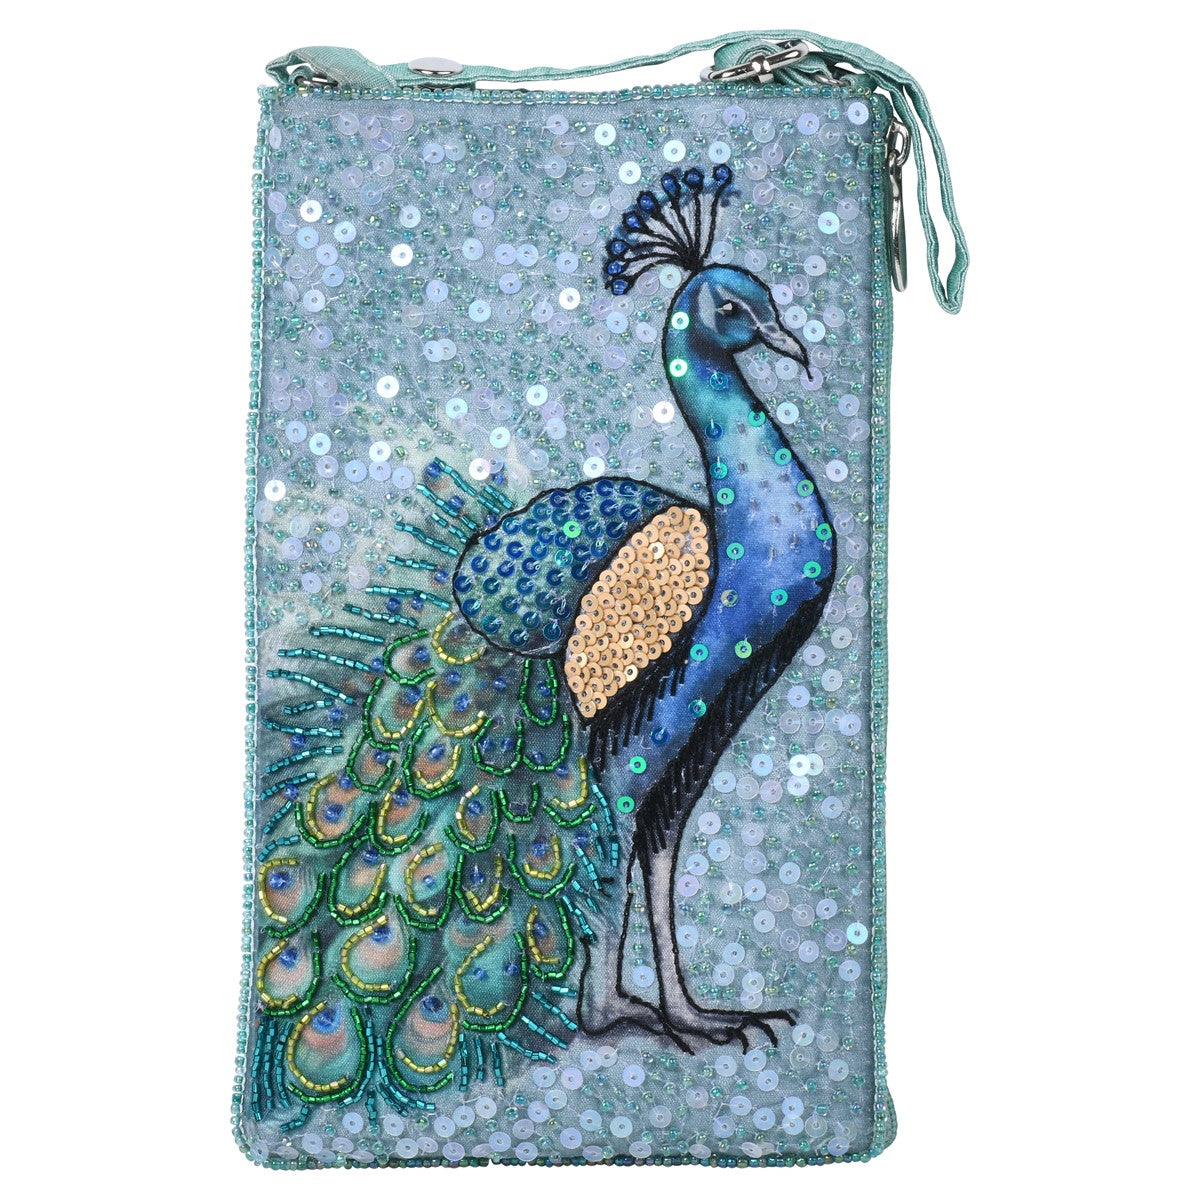 Shimmering Peacock Party Bag